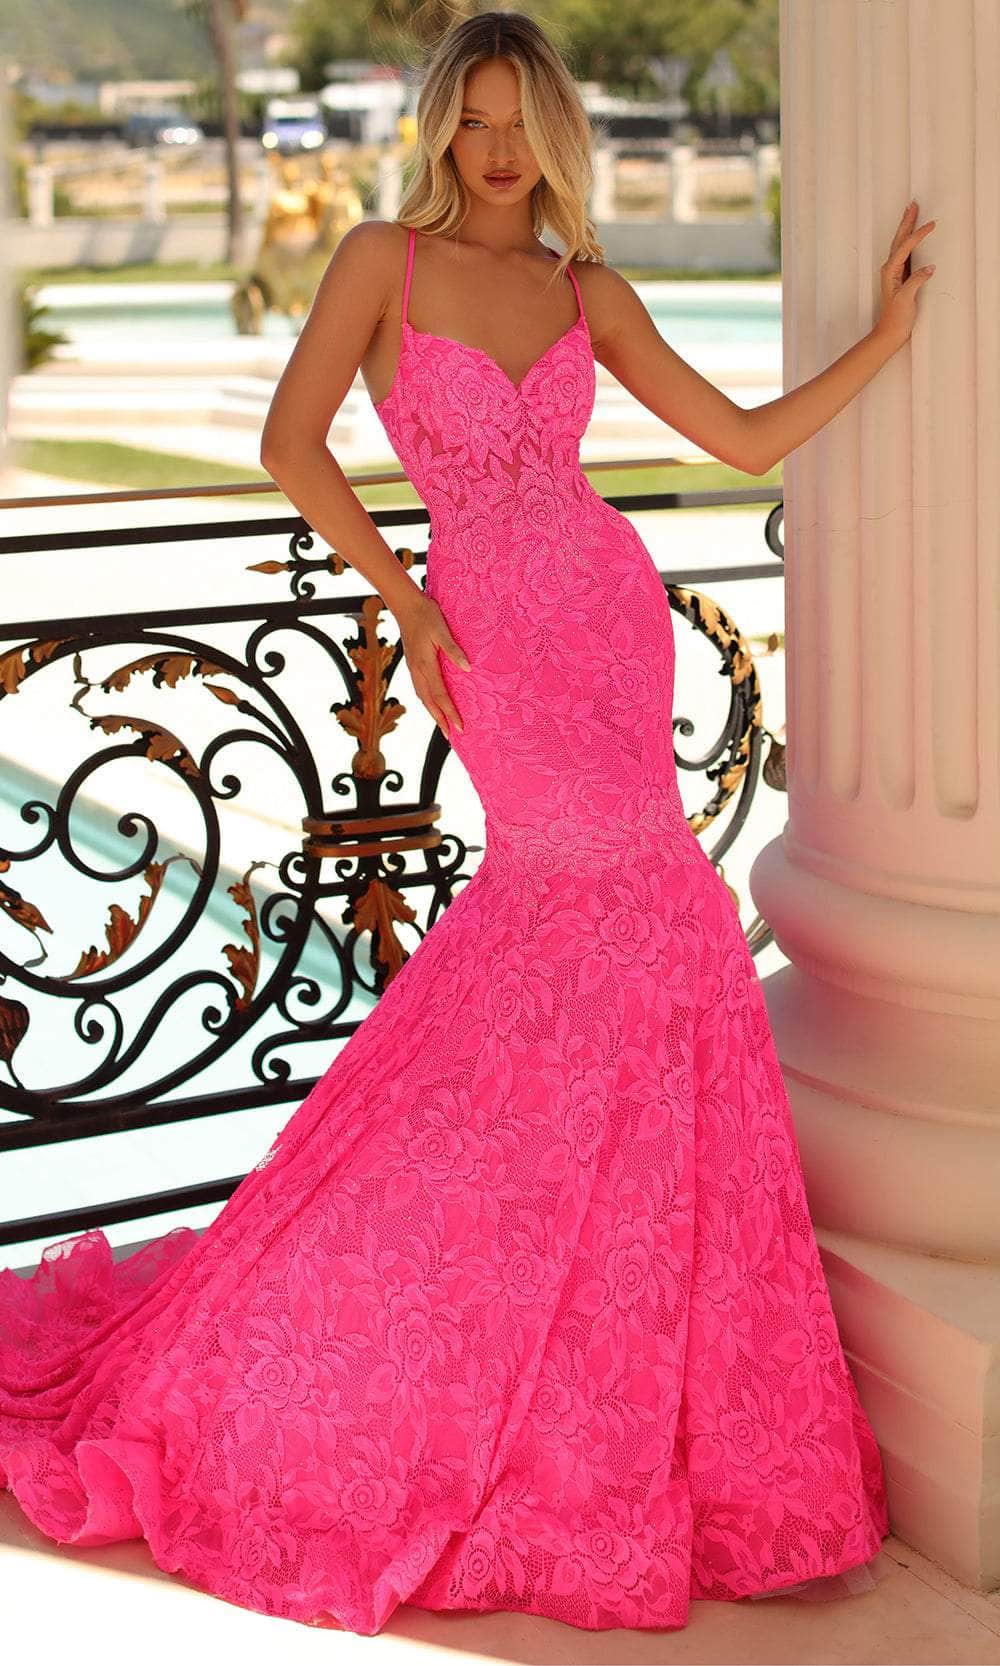 Image of Clarisse 810475 - Floral Lace Mermaid Evening Gown